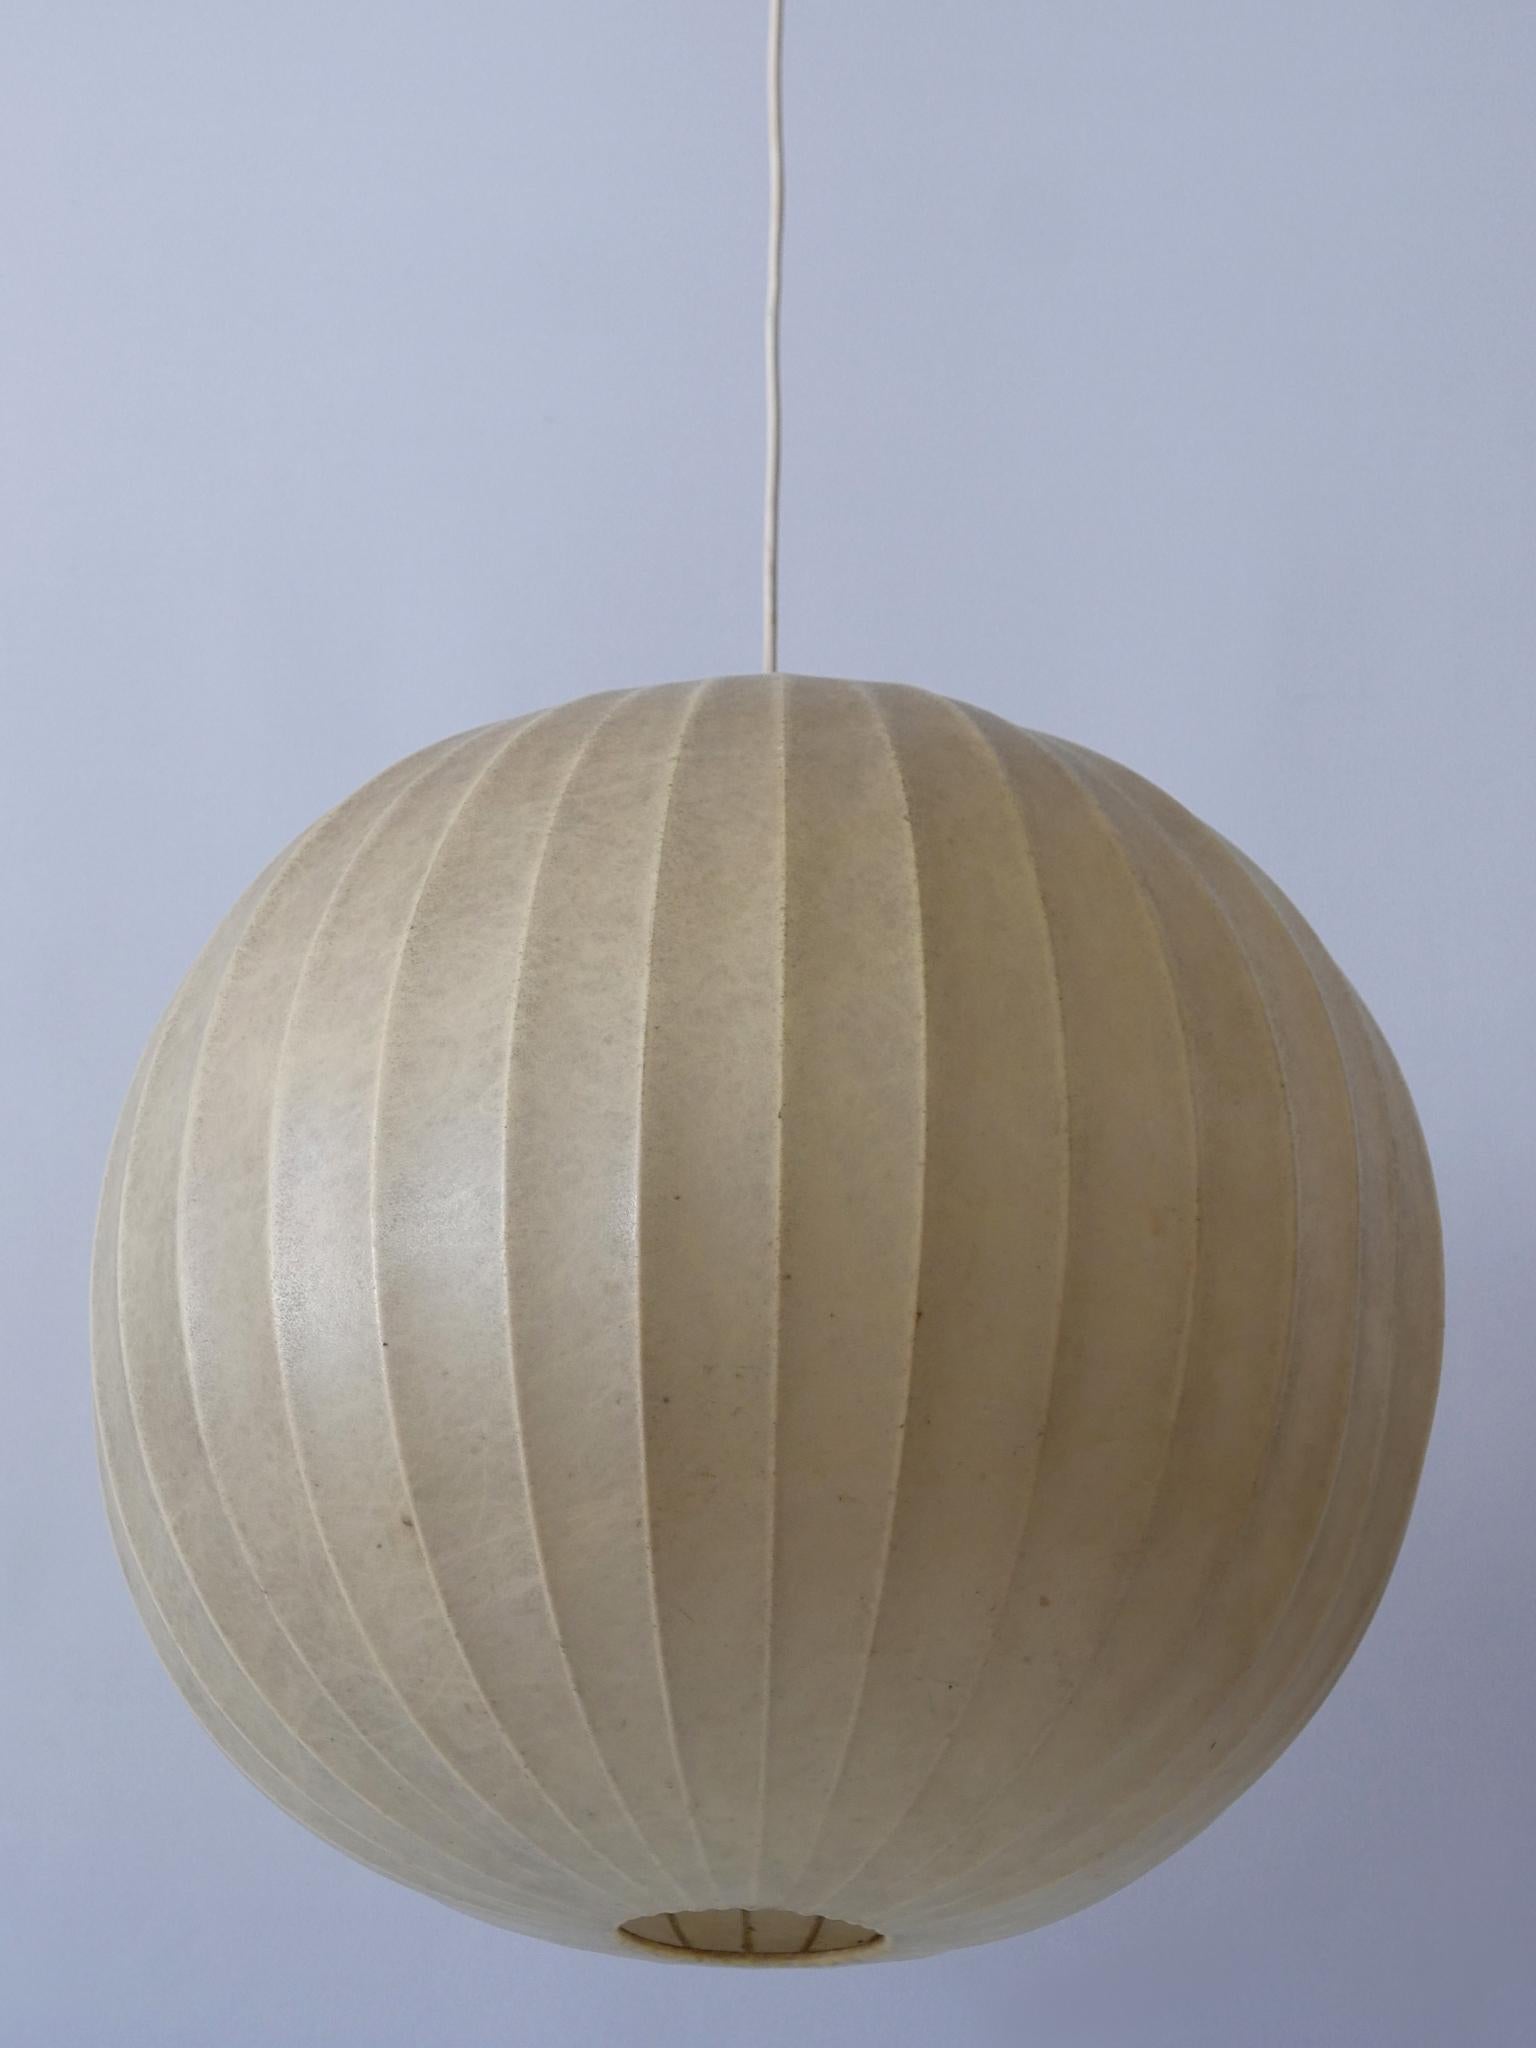 Highly decorative and large Mid-Century Modern cocoon pendant lamp or hanging light. Designed & manufactured probably by Goldkant, Germany, 1960s.

Executed in sprayed latex material and metal, the pendant lamp needs 1 x E27 / E26 Edison screw fit